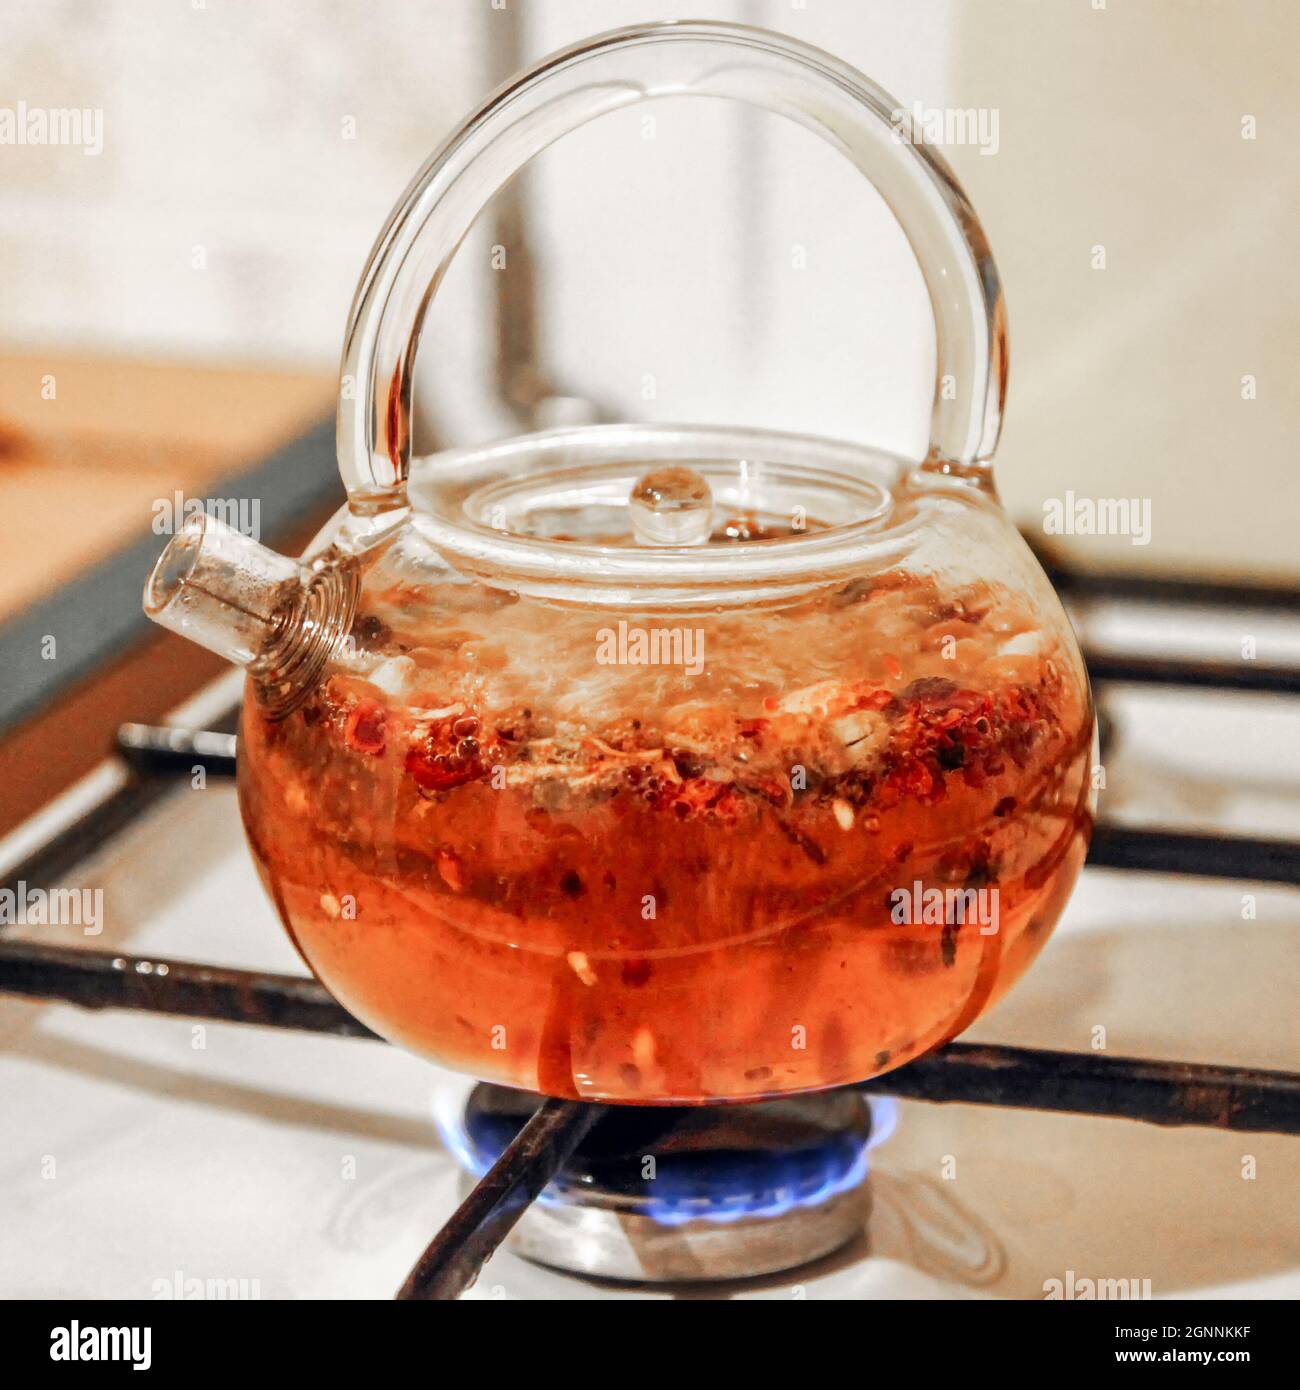 https://c8.alamy.com/comp/2GNNKKF/red-tea-drink-is-boiled-in-a-glass-kettle-on-a-gas-stove-close-up-2GNNKKF.jpg